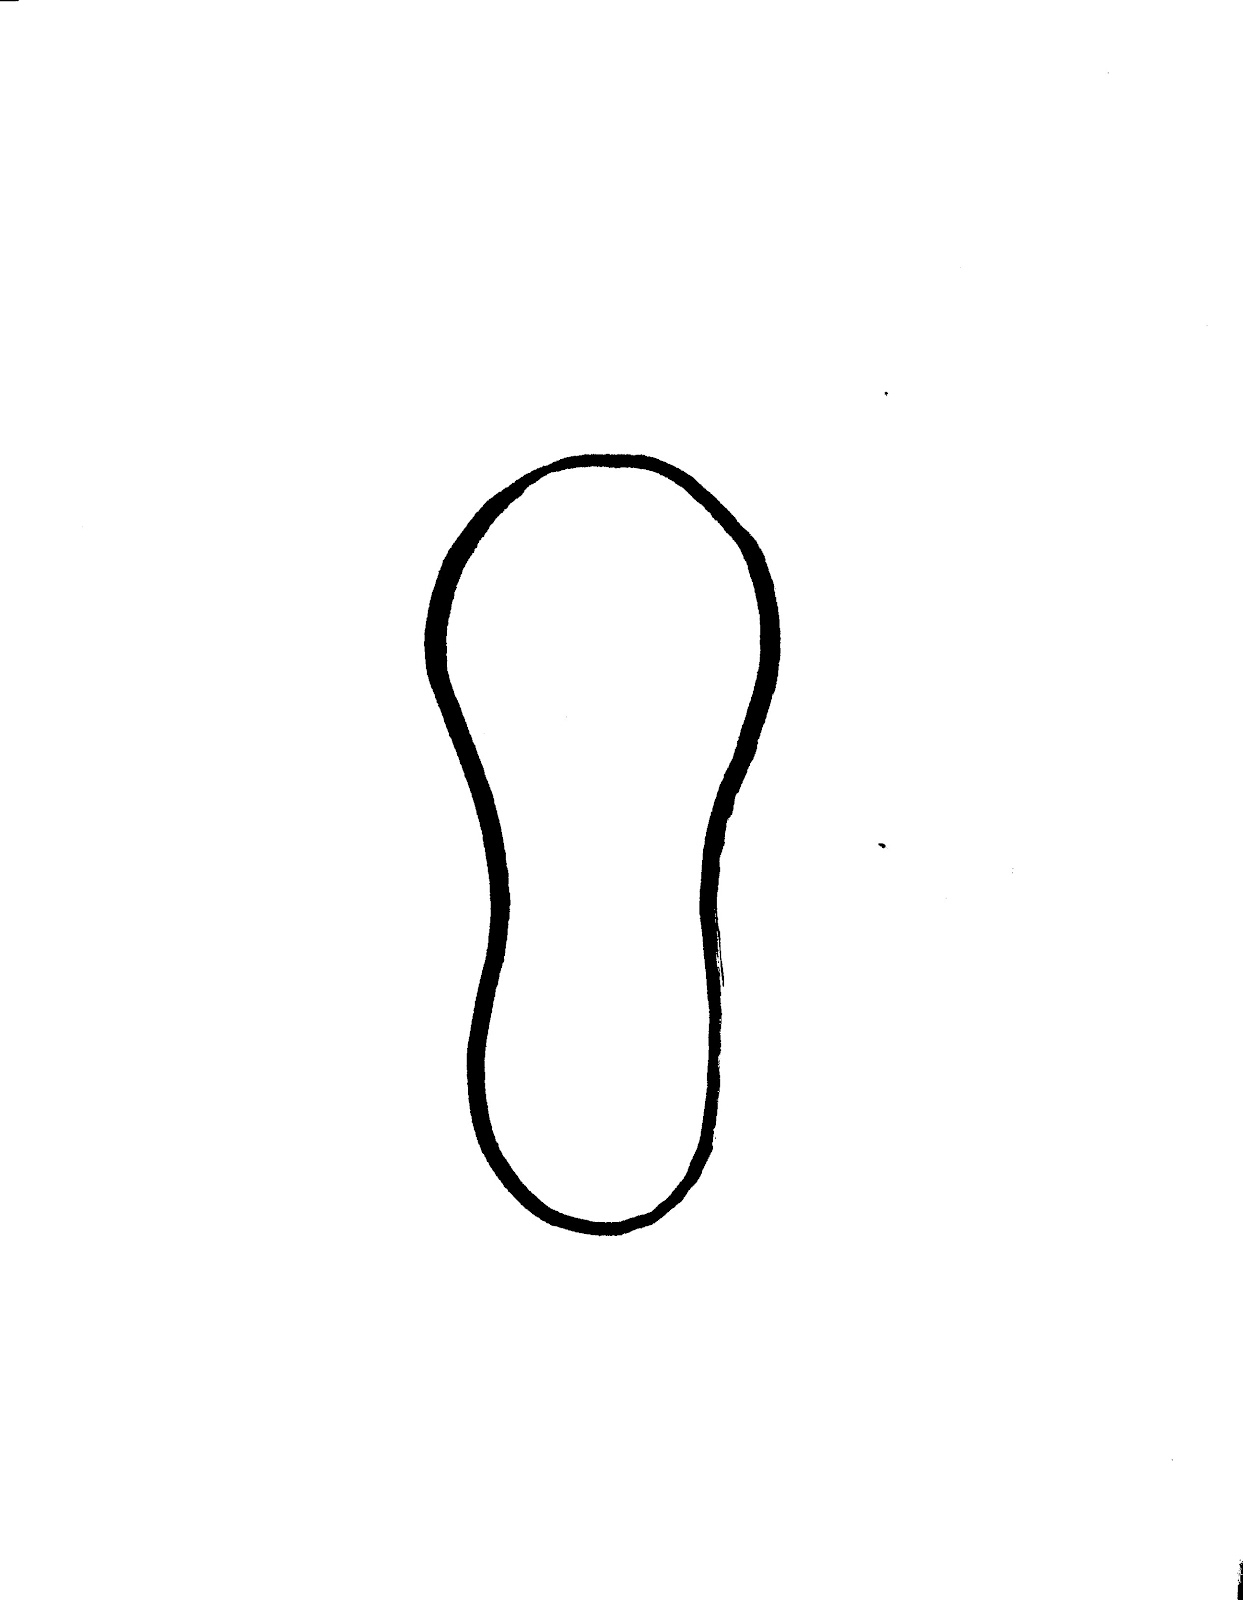 Shoe Outline Outline Of Their Shoe With